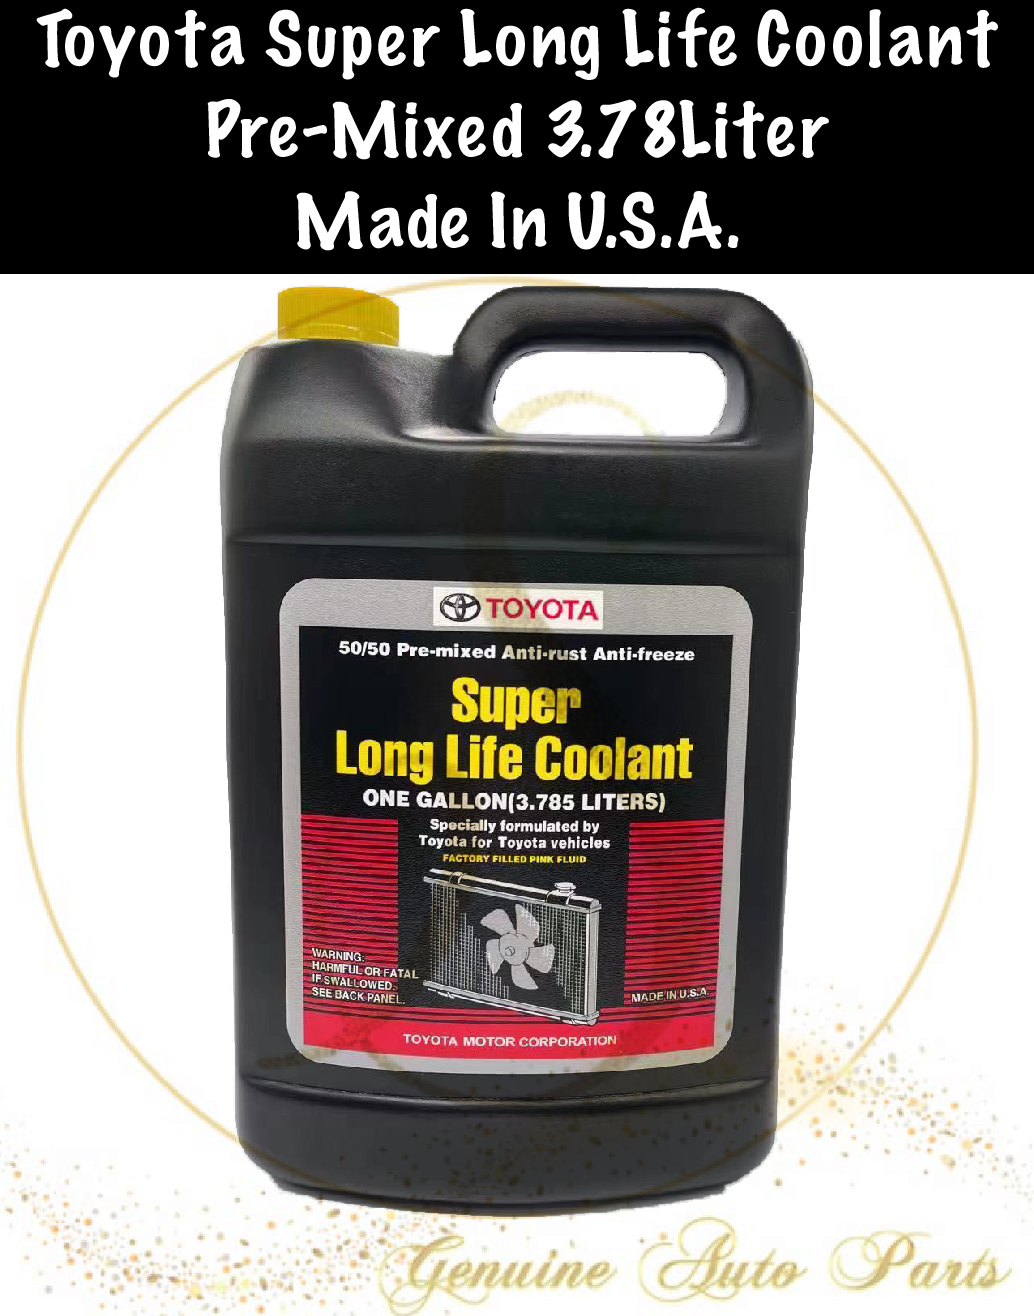 ORIGINAL MADE IN U.S.A. TOYOTA COOLANT SUPER LONG LIFE COOLANT PRE MIXED 3.78 LITER PINK COLOUR 08889-80061